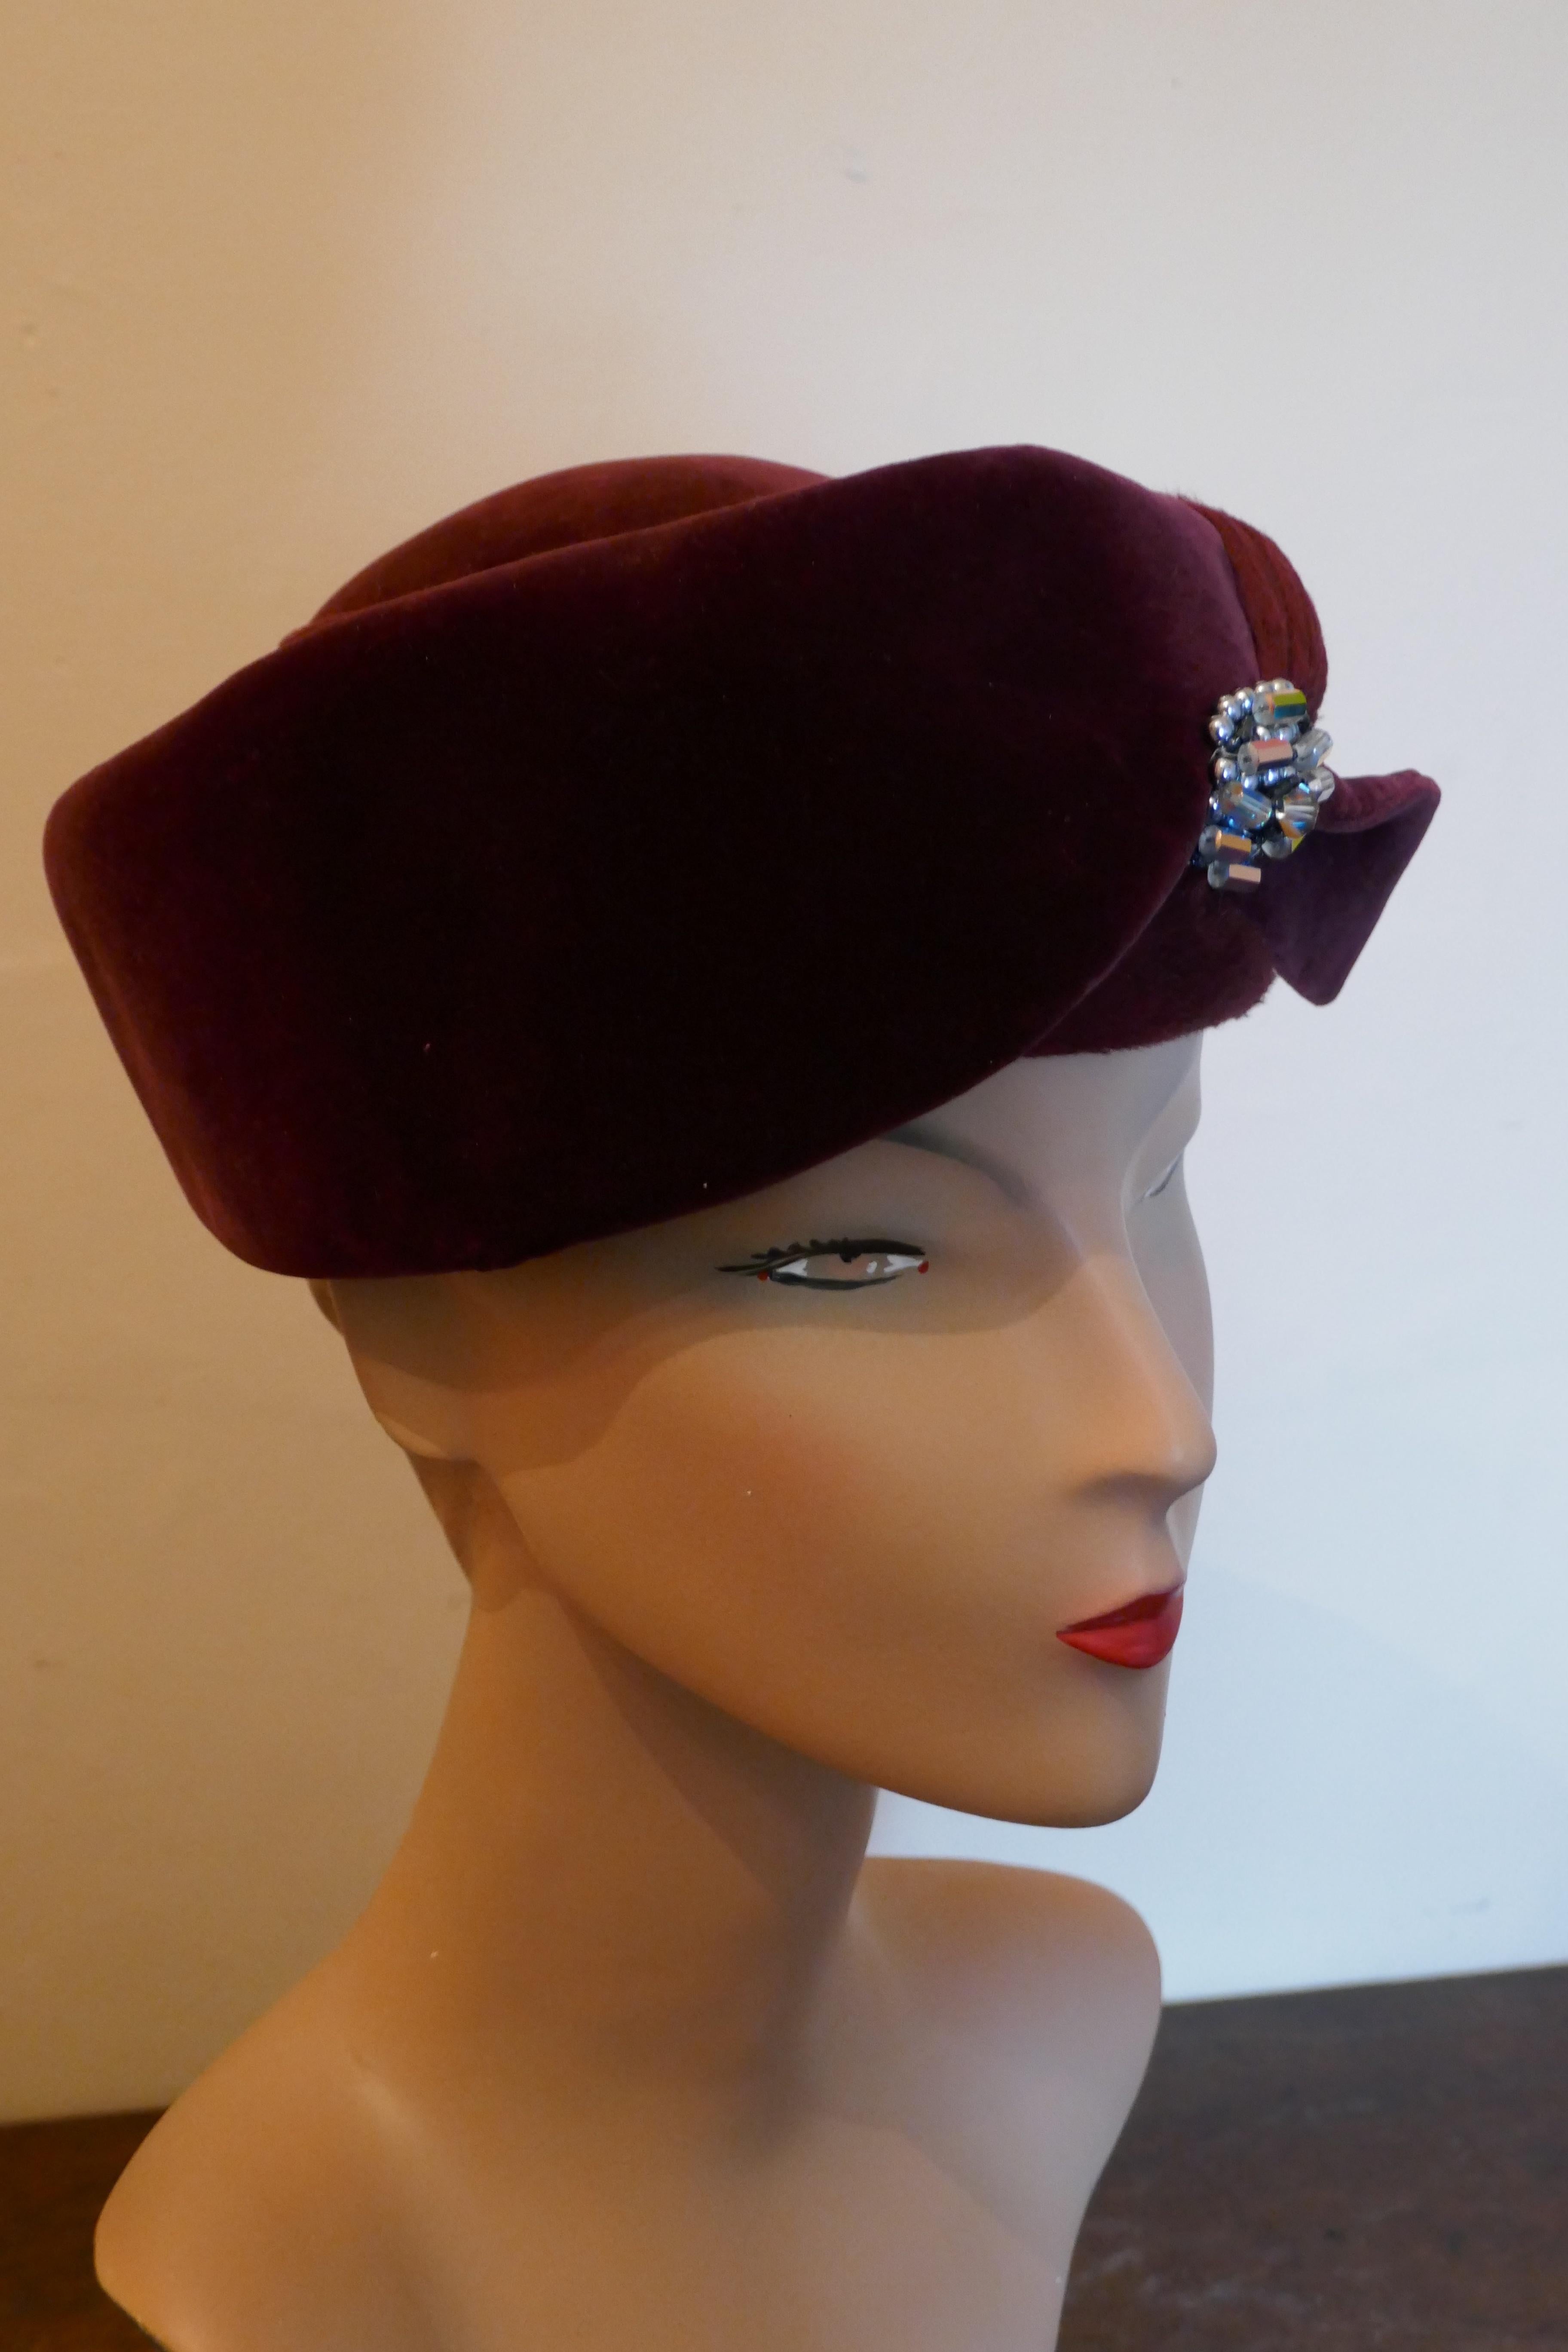 Original 1950s Maroon Felt and Velvet Hat BY Connor

This gorgeous Nostalgic Hat has beautiful slightly turban shape trimmed with a crystal broached the front 
This one is a classic design by Connor, wear it anywhere 
The hat is in good condition,